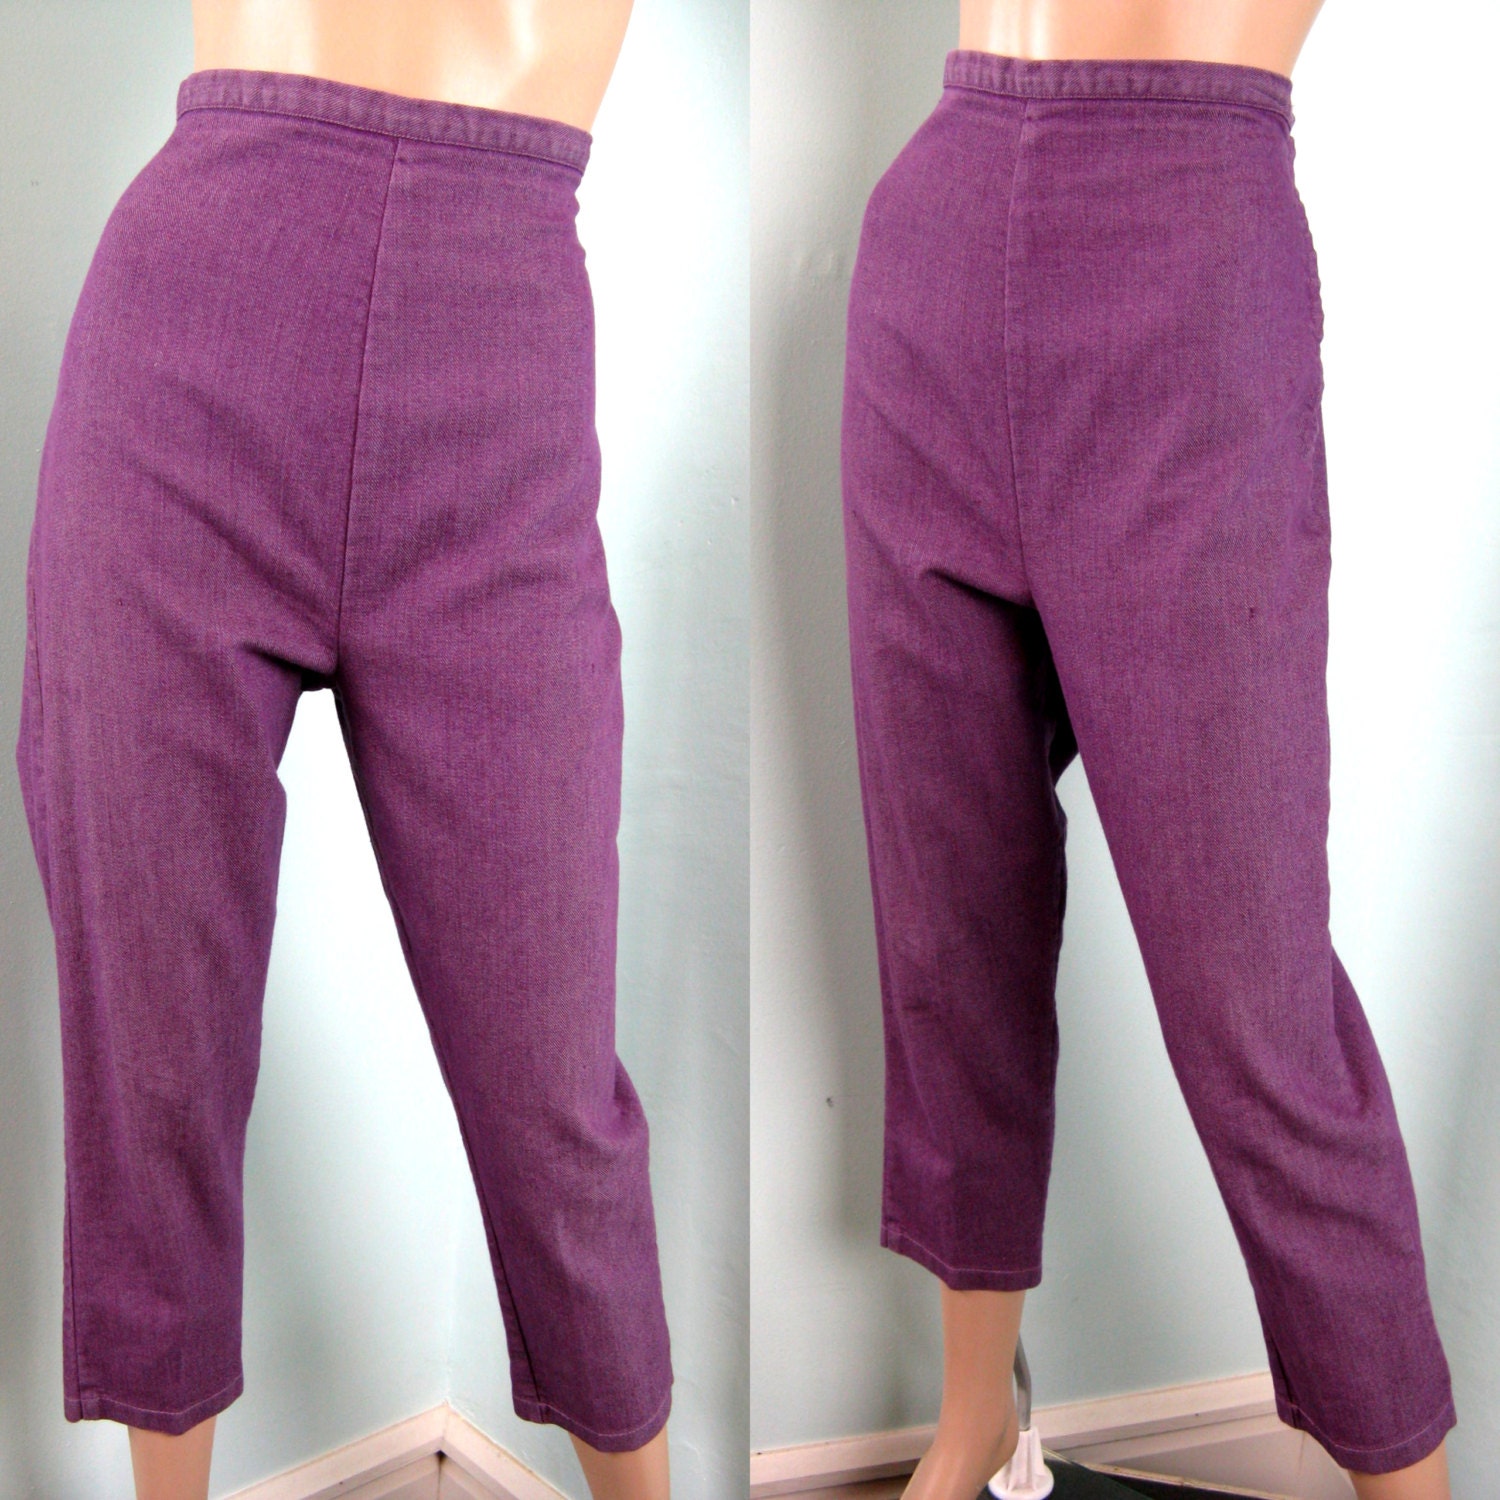 Vintage 1950s Purple Pedal-Pushers 50s Pants by TravelingCarousel